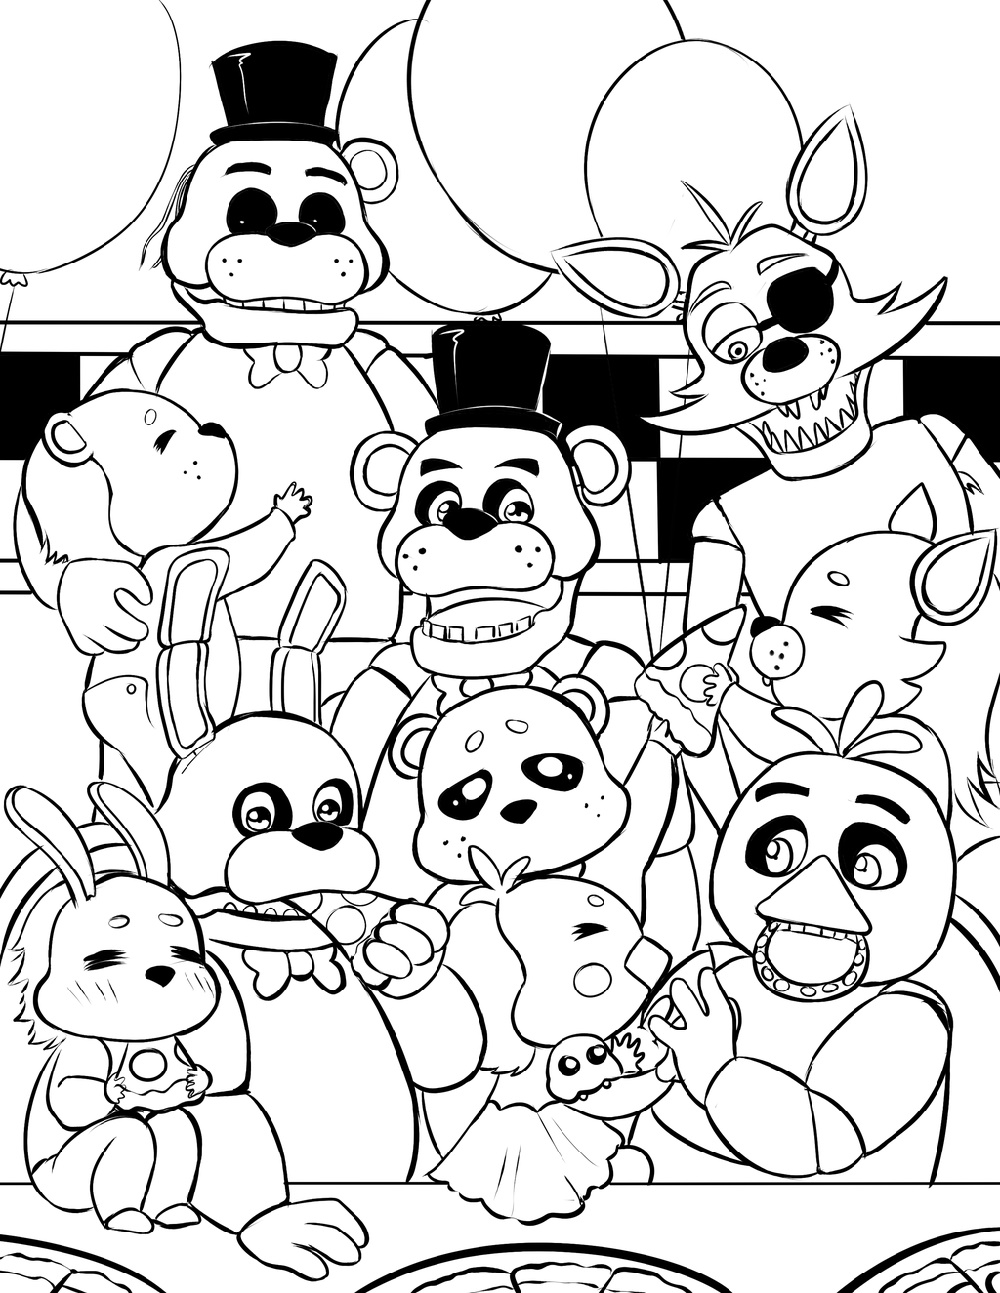 Five Nights At Freddys Coloring Pages To Print Characters 